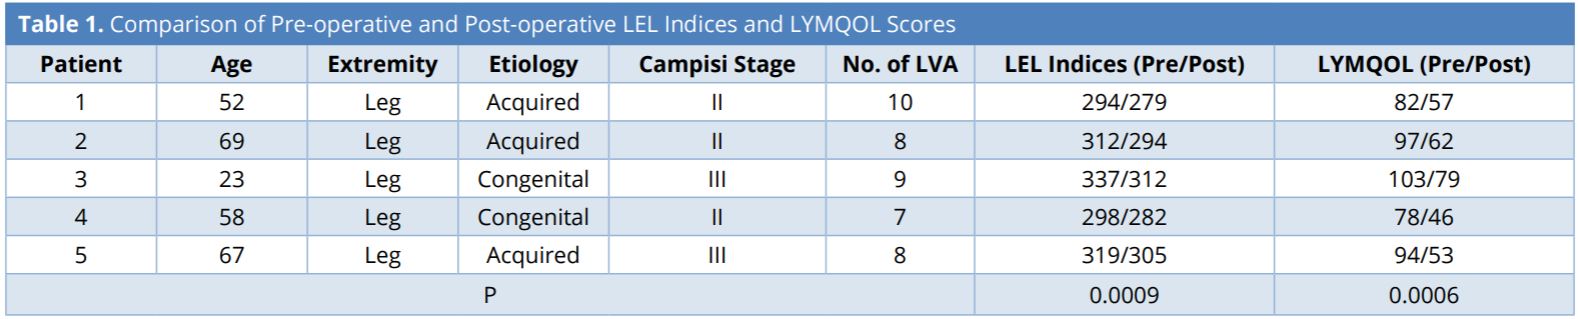 Table 1.JPGComparison of pre-operative and post-operative LEL indices and LYMQOL scores. <br><sub>Lymphedema index is a circumference-based system that takes measurements at five limb levels and references the sum to the patient’s body mass index. LYMQOL is a validated lymphedema-specific quality of life assessment that tracks four condition-specific domains – function, appearance, symptoms, and mood. LEL, lower extremity lymphedema; LYMQOL, lymphedema-specific quality of life assessment; LVA, lymphaticovenular anastomosis; Pre, pre-operative; Post, post-operative.